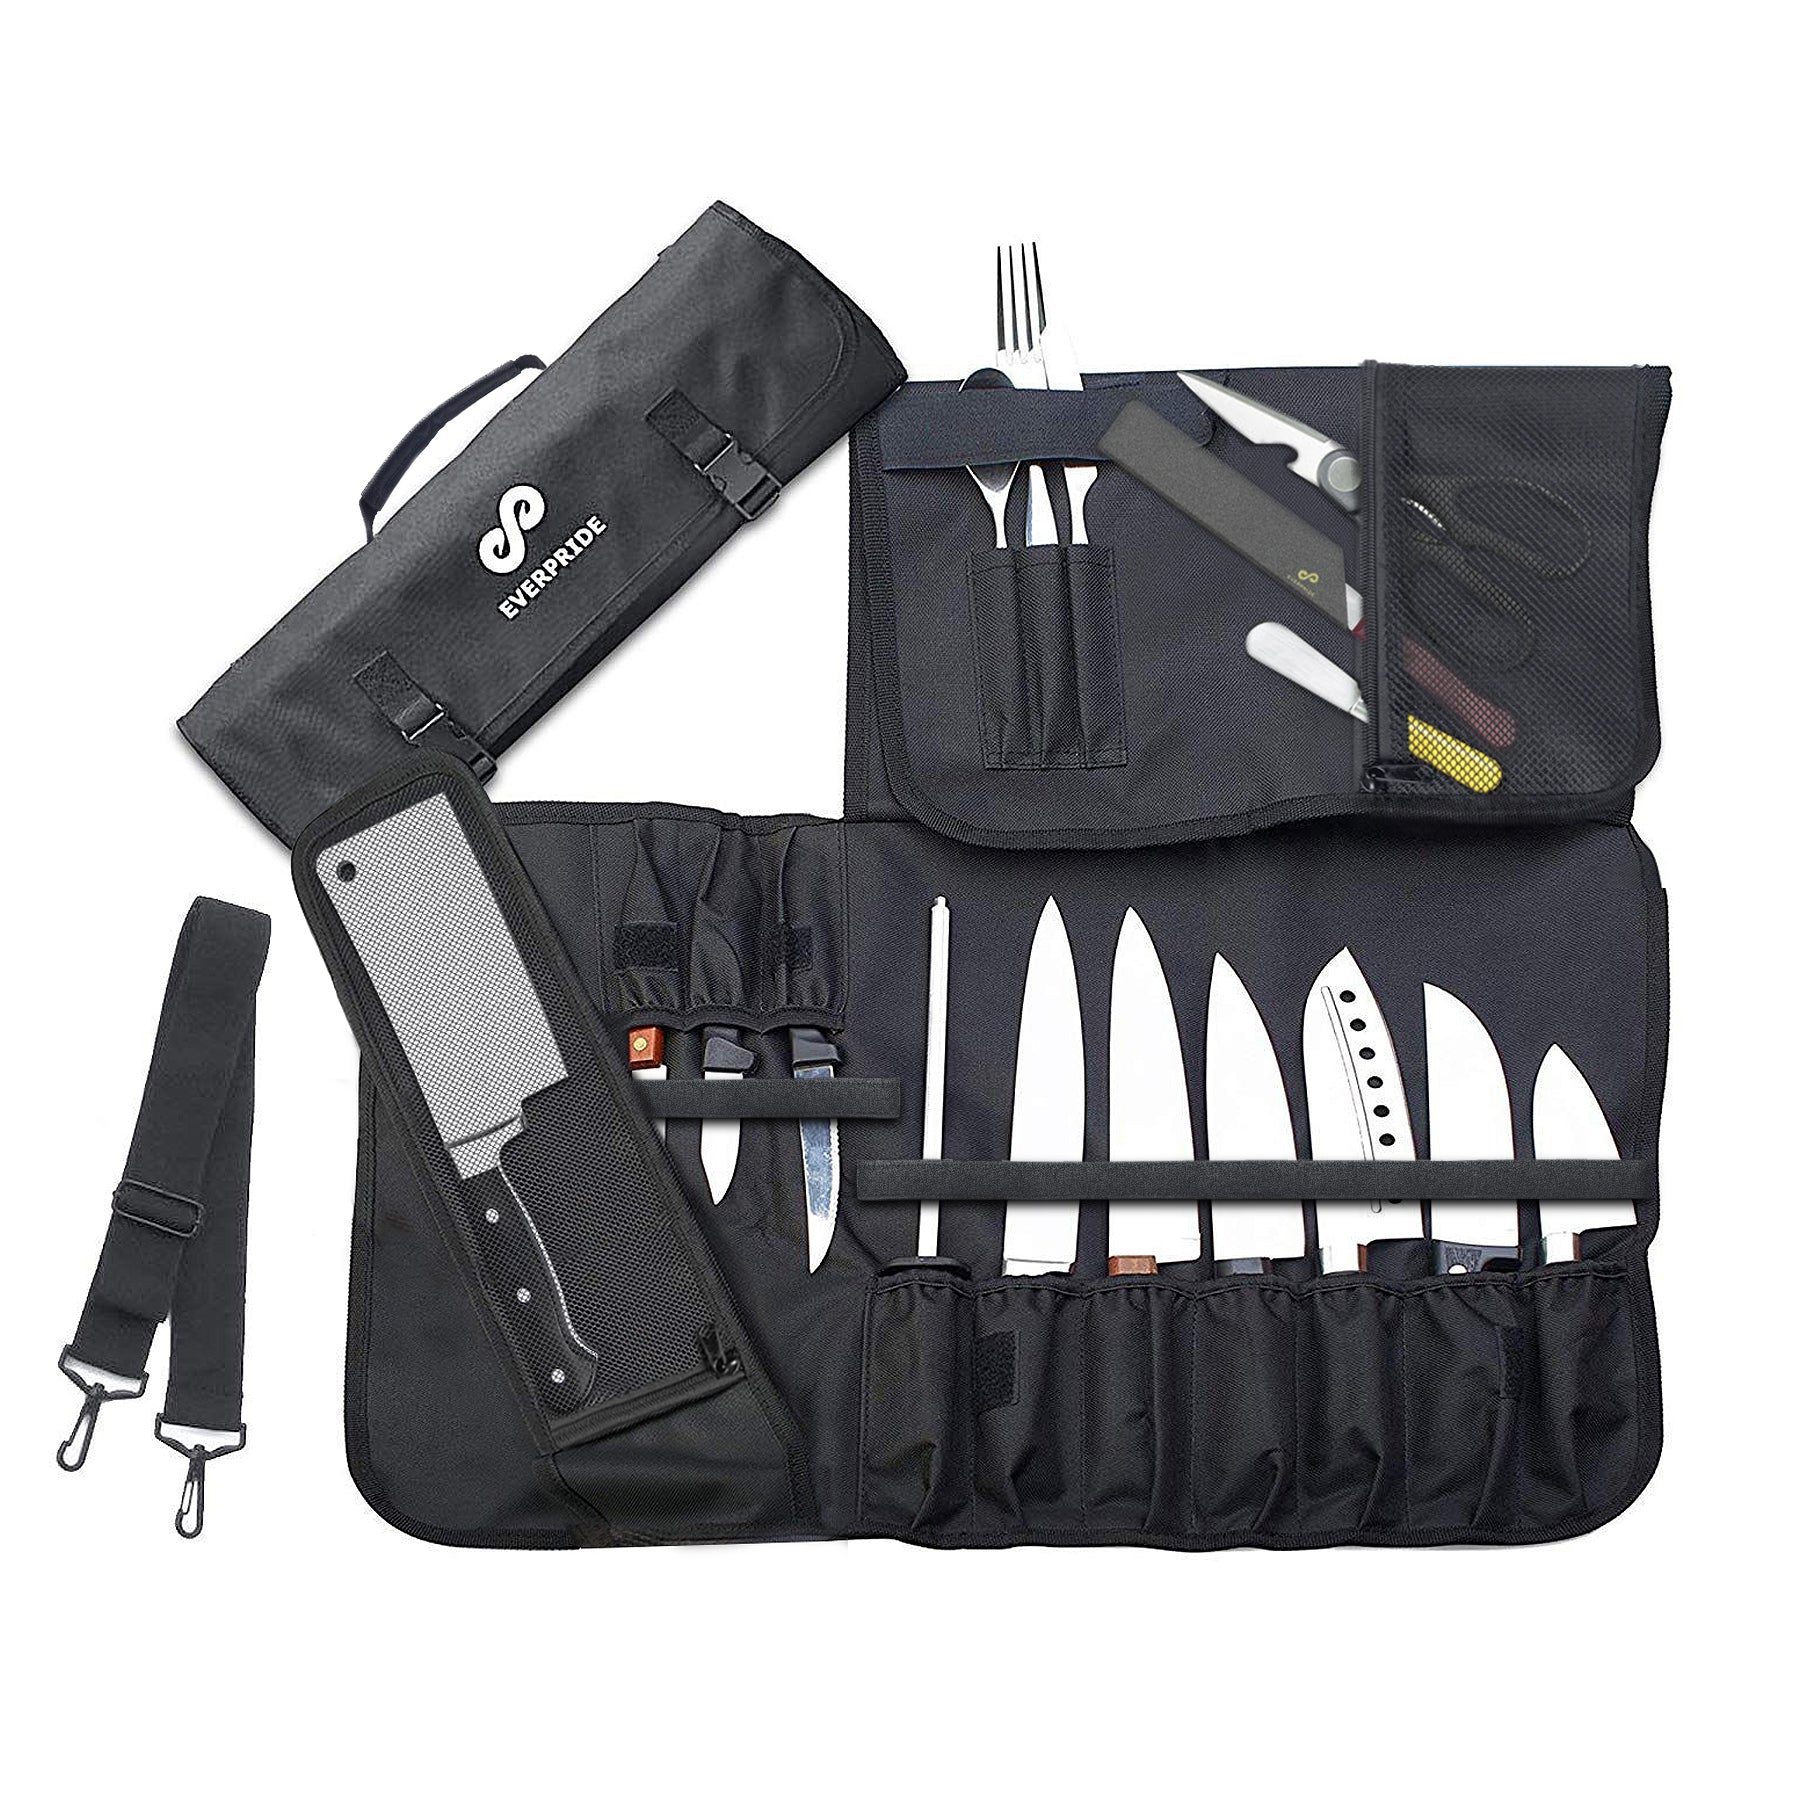 Professional Chef's Knife Bag, Stores 20 Knives & Tools